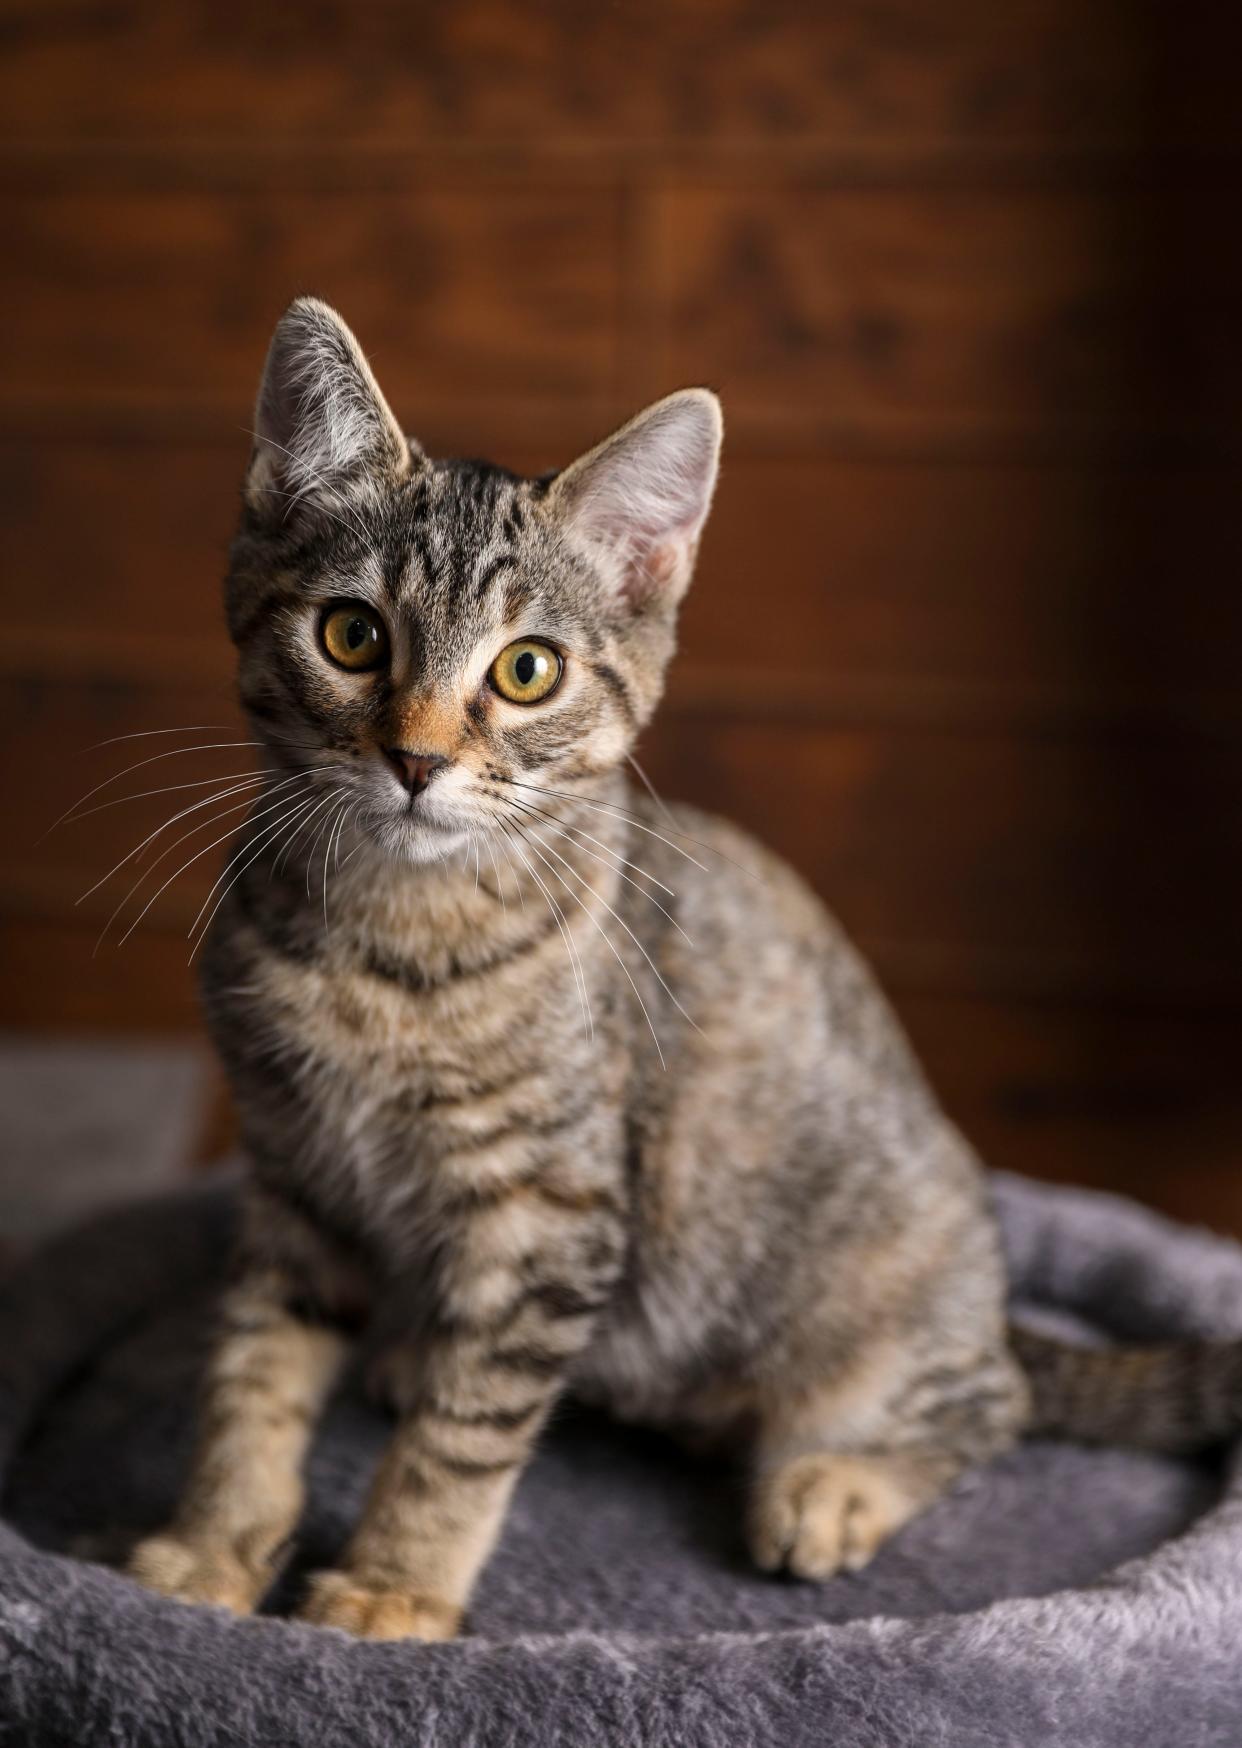 Fern is 3 months old and is an affectionate lap cat available for adoption as a pair with Sassy at The Little Pumpkin Cat Cafe in Independence.